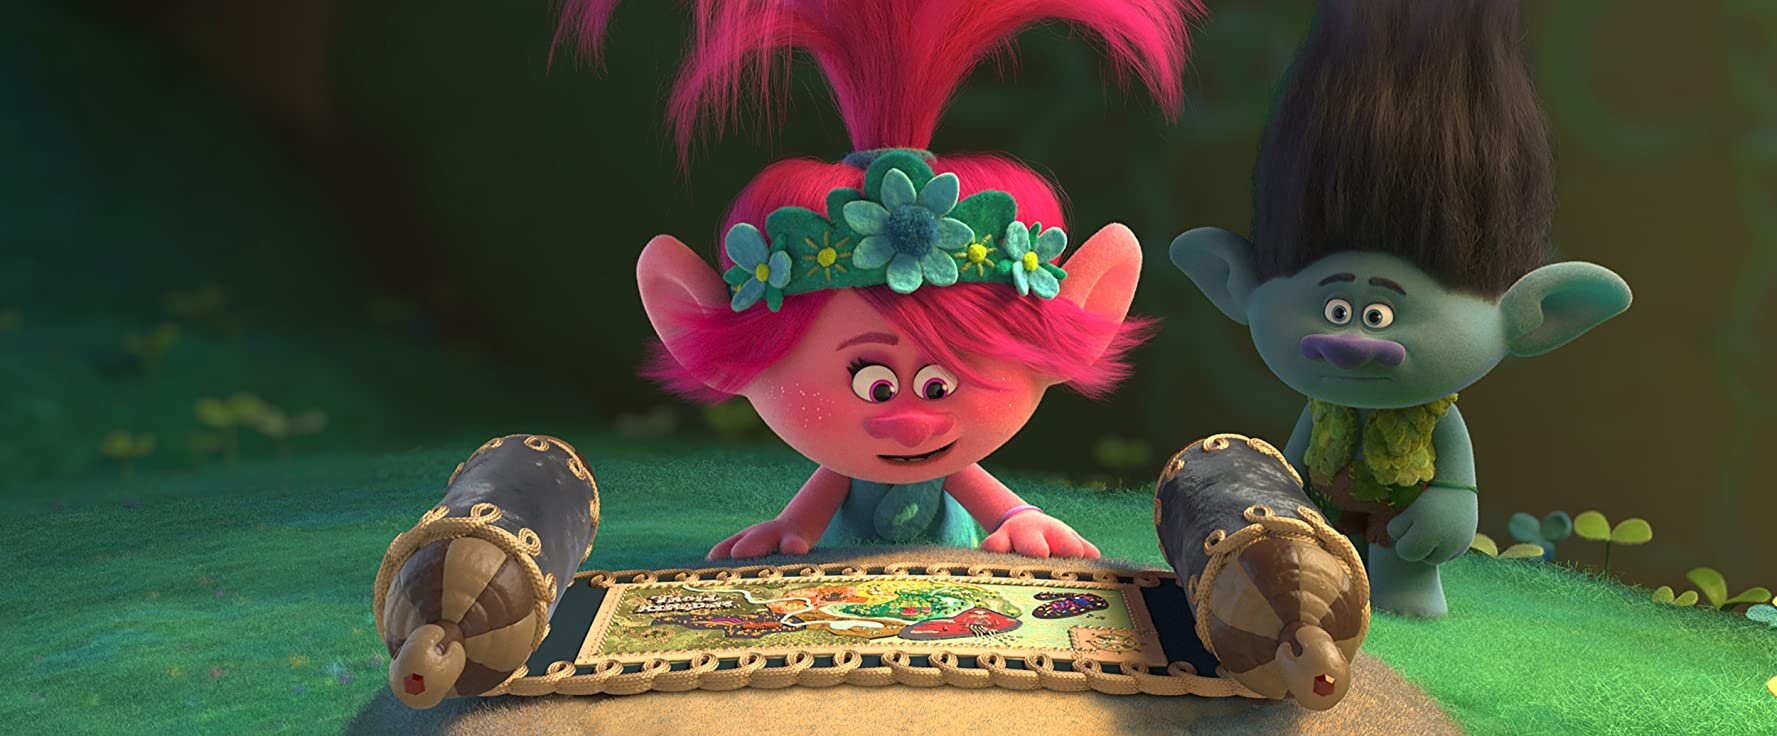 TROLLS WORLD TOUR Made More Money in Its 3-Week VOD Run Than Its Original Made in 5 Months in Theaters — GeekTyrant